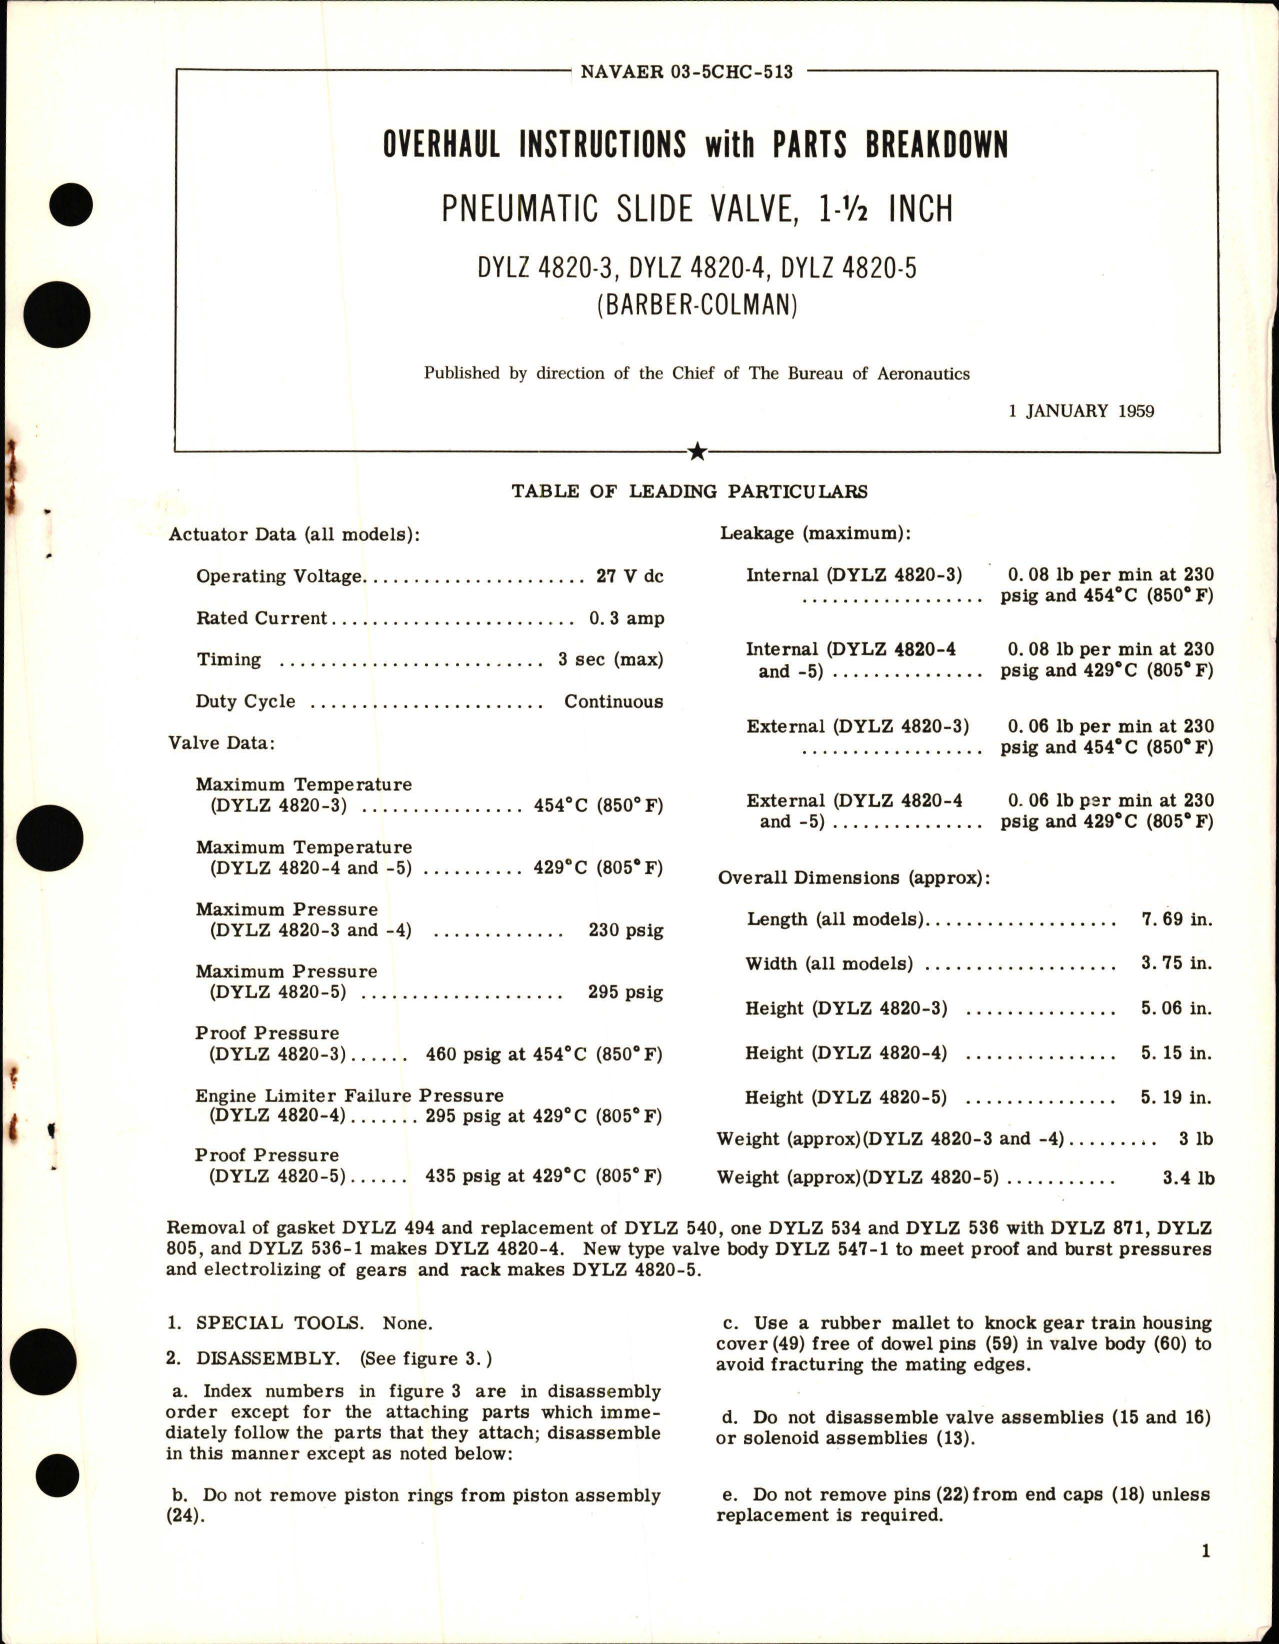 Sample page 1 from AirCorps Library document: Overhaul Instructions with Parts Breakdown for Pneumatic Slide Valve 1.5 Inch - DYLZ 4820-3, DYLZ 4820-4, DYLZ 4820-5 